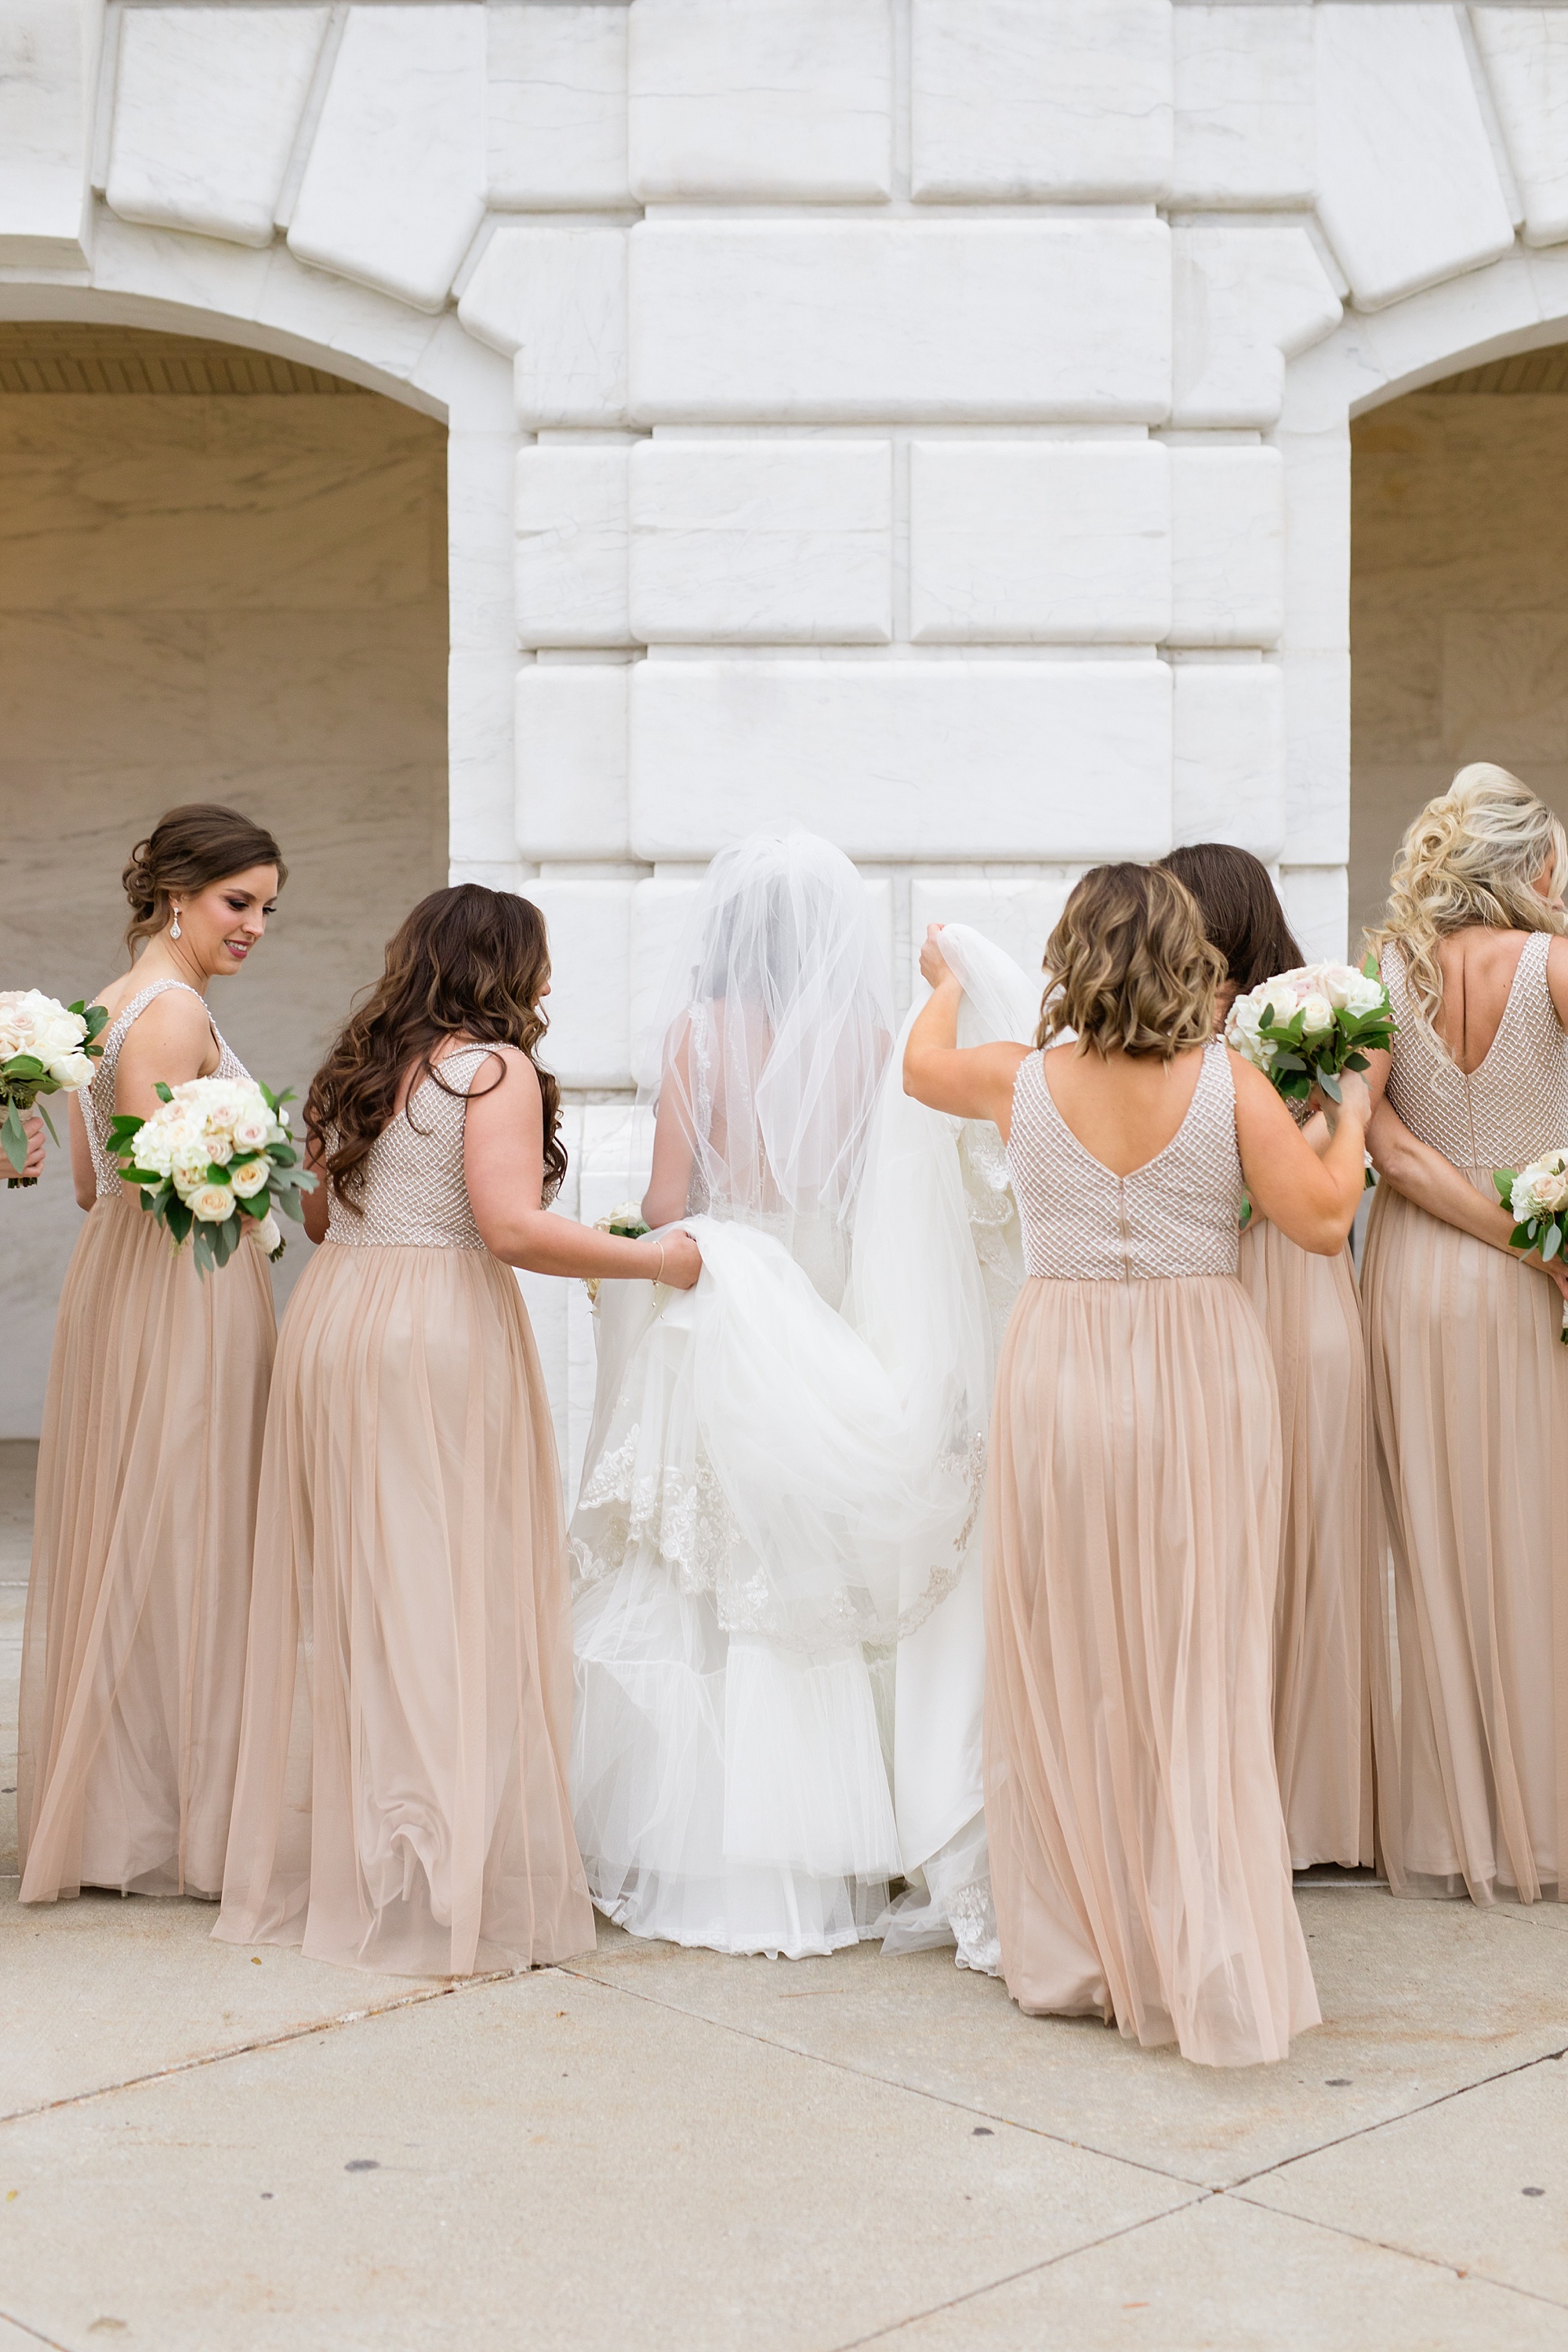 An elegant blush and gold Downtown Detroit wedding at the Cathedral of the Most Blessed Sacrament by Breanne Rochelle Photography.